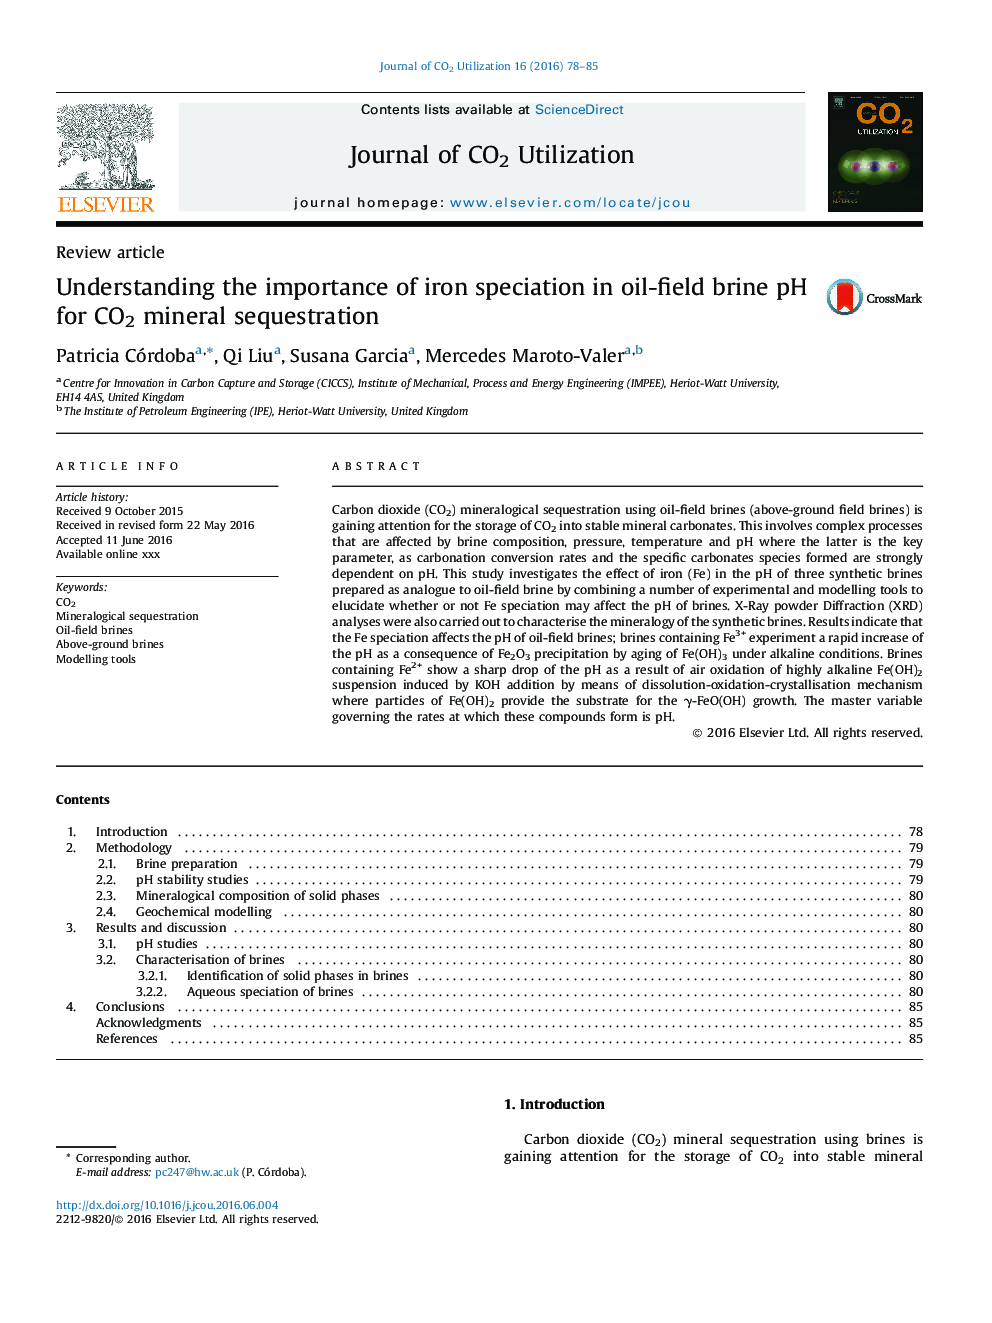 Understanding the importance of iron speciation in oil-field brine pH for CO2 mineral sequestration